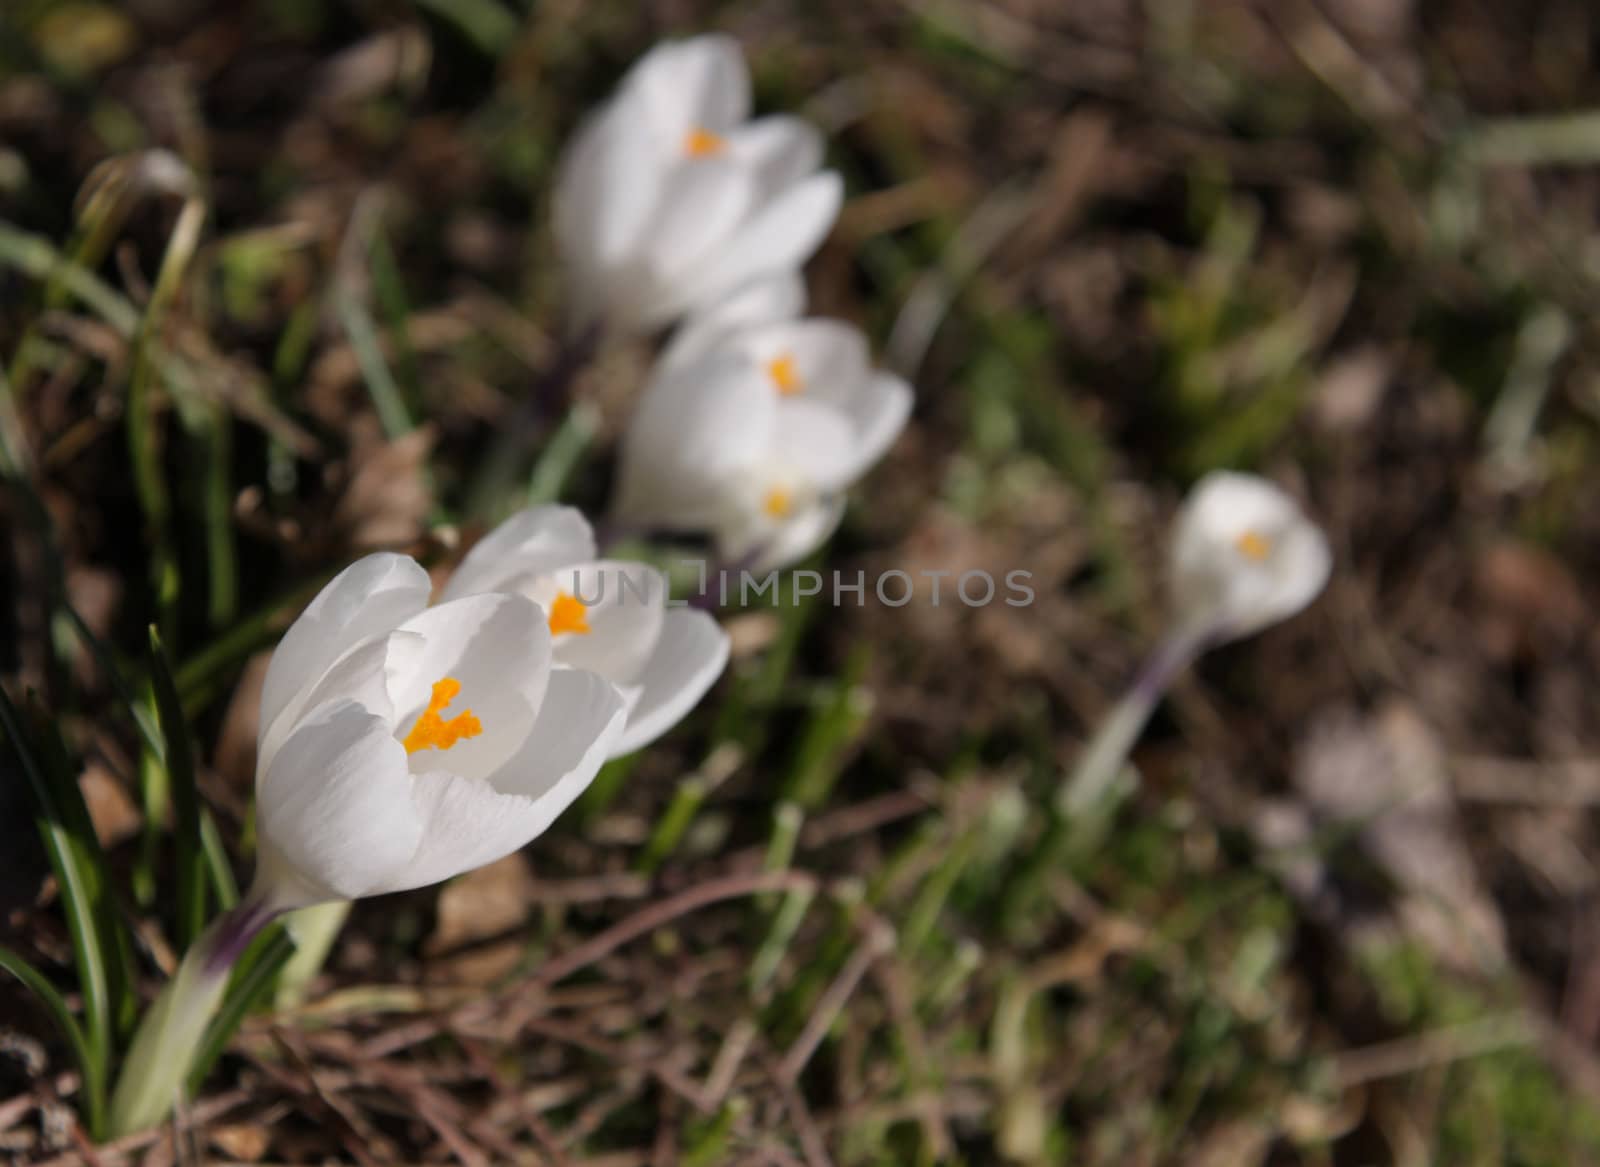 A group of white crocus spring flowers.
